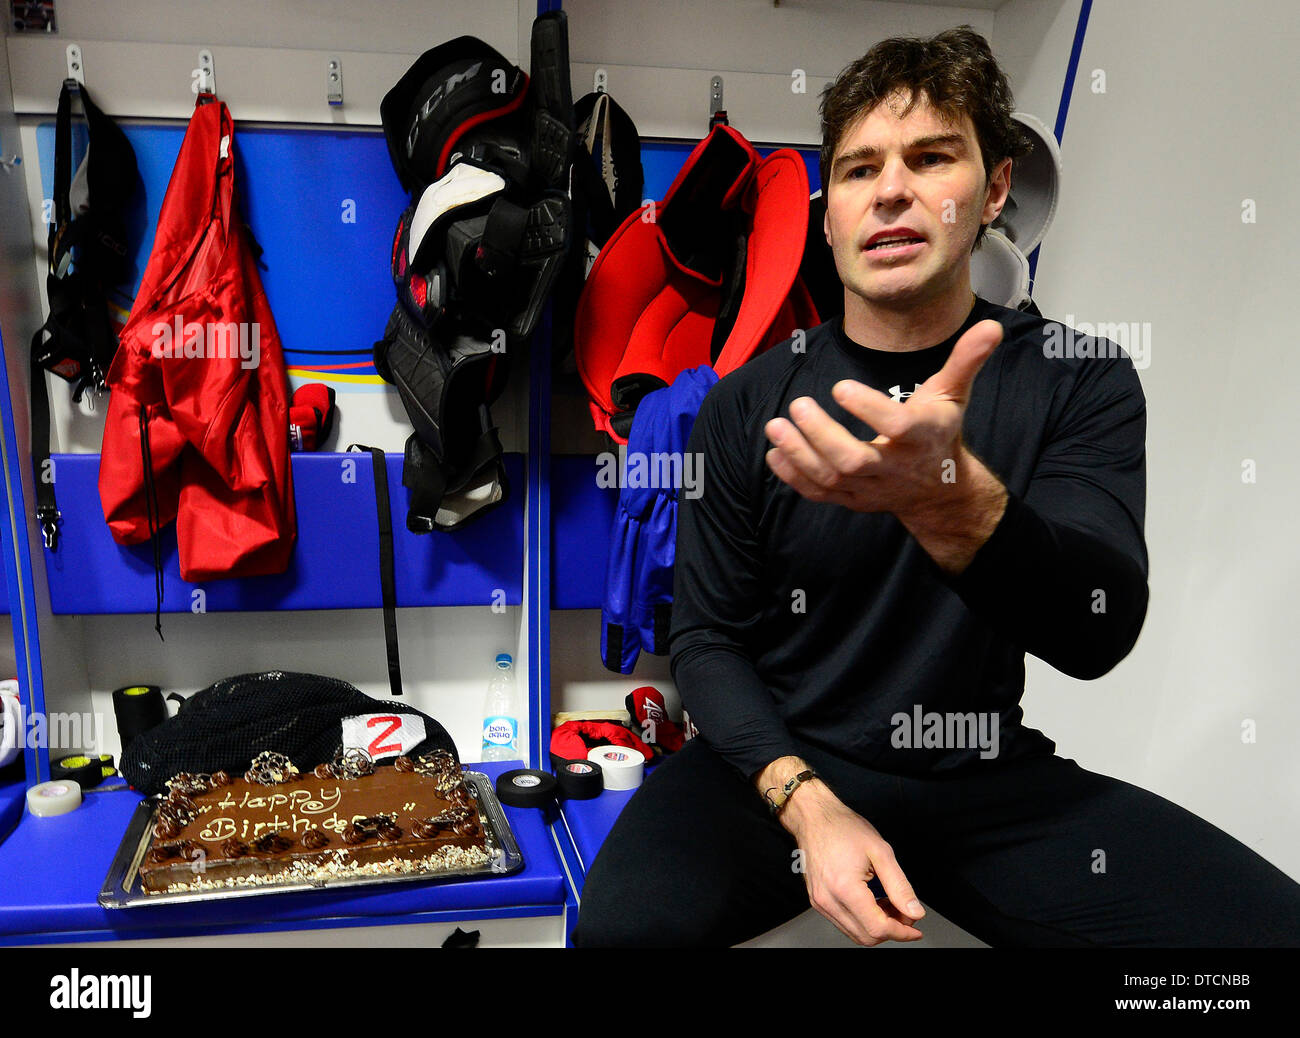 Sochi, Russia. 15th Feb, 2014. Player of the of Czech ice hockey team for the Winter Olympic Games Jaromir Jagr is seen with a chocolate cake which he got for his 42nd birthday in Sochi, Russia, February 15, 2014. © Roman Vondrous/CTK Photo/Alamy Live News Stock Photo